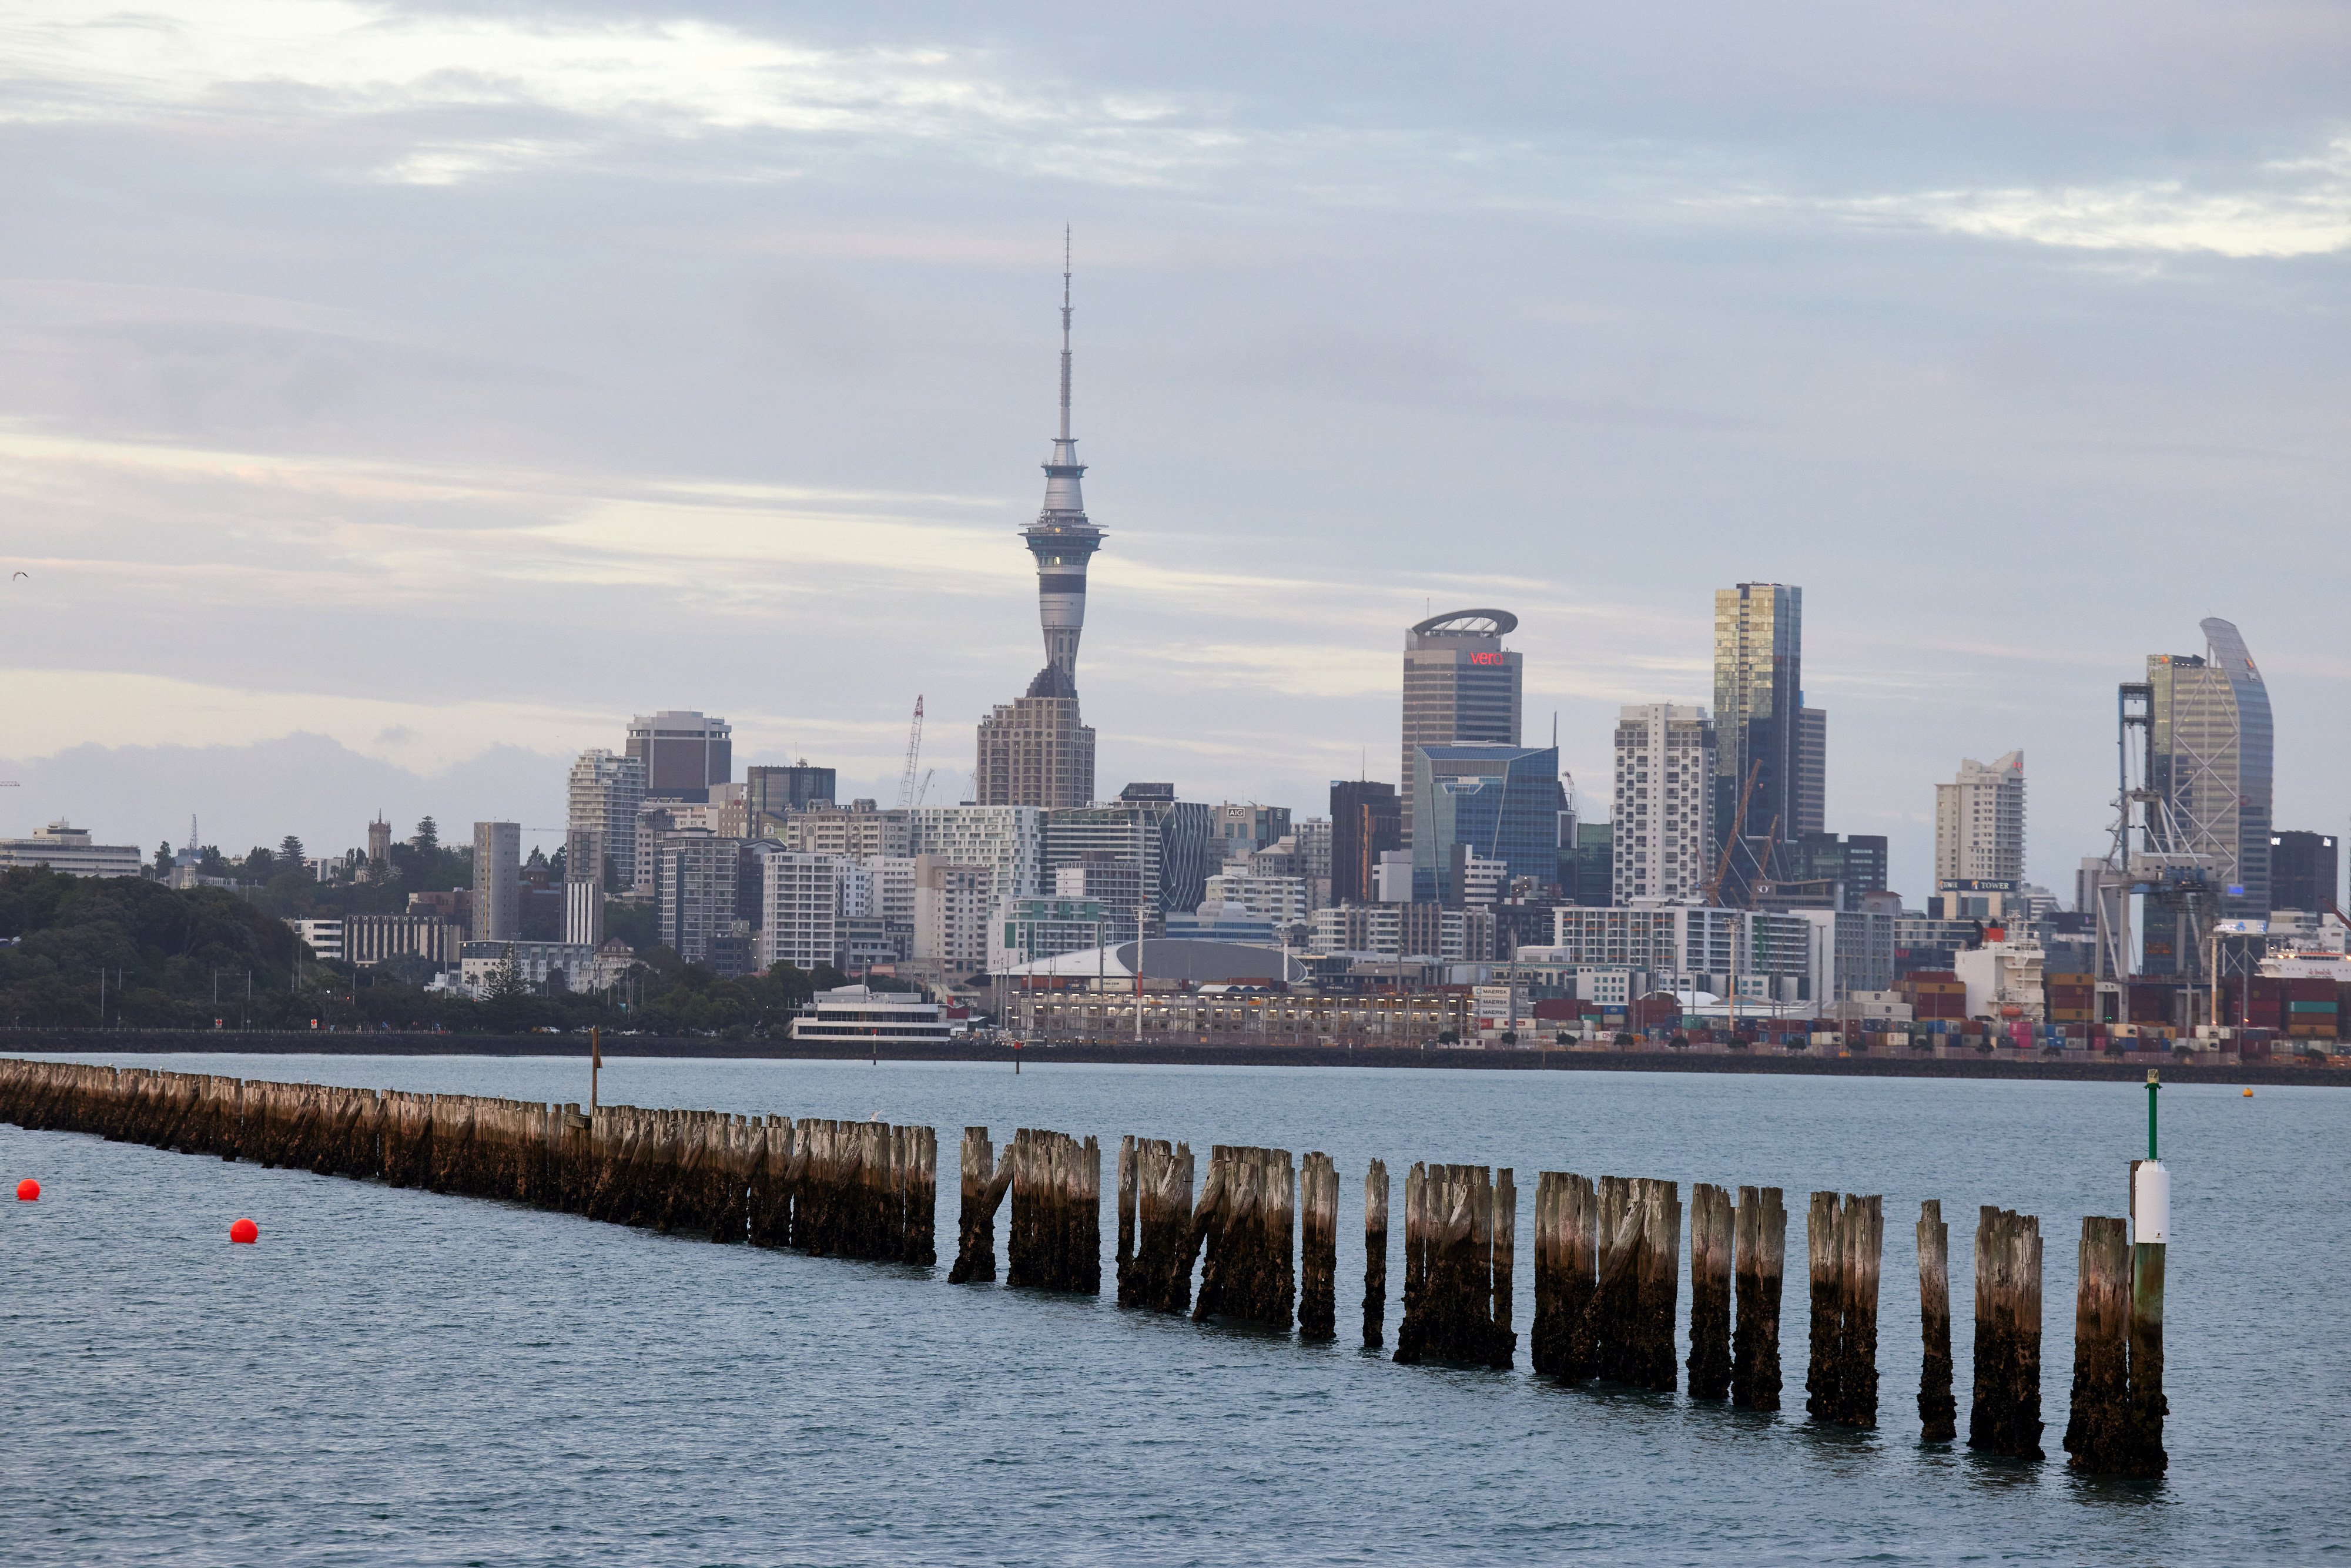 The skyline of Auckland, New Zealand. Minimum skill and work experience criteria, as well as an English-language requirement, will apply to most jobs under changes to the visa programme. Photo: Bloomberg